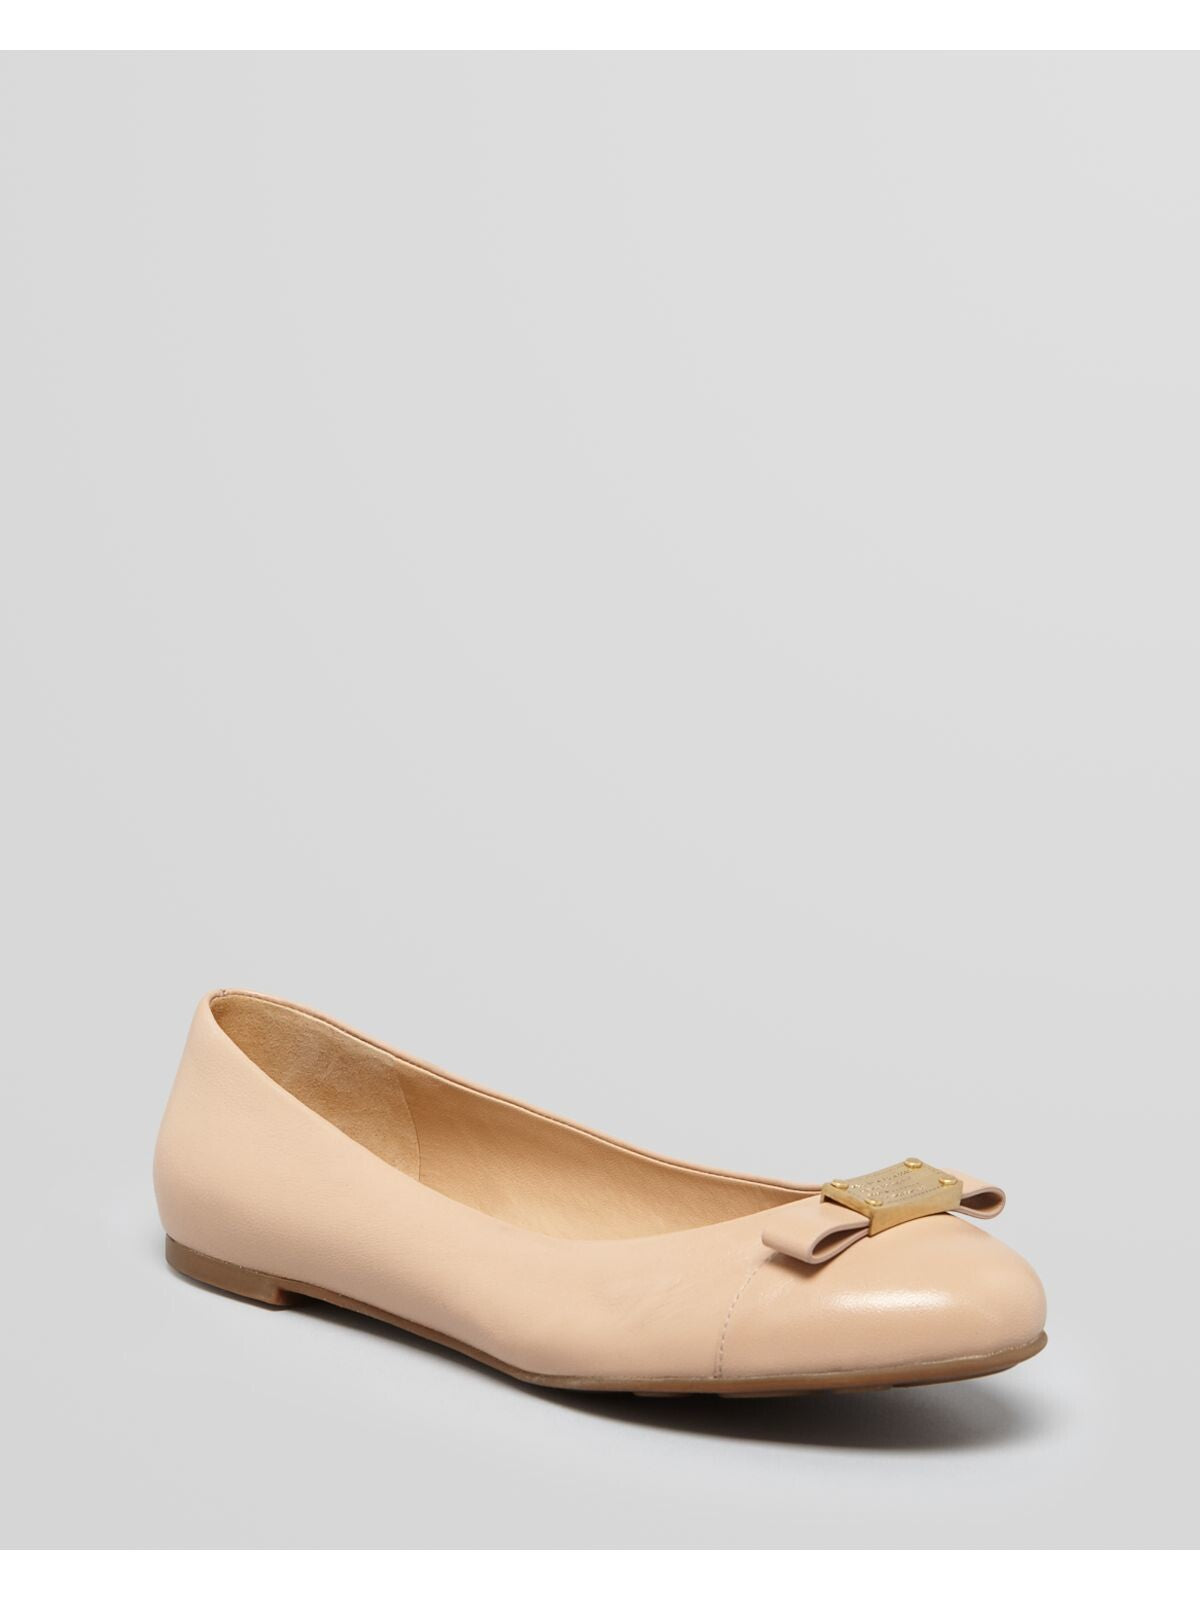 MARC JACOBS Womens Nude Beige Engraved Gold-Toned Hardware Padded Bow Accent Round Toe Slip On Leather Ballet Flats 39